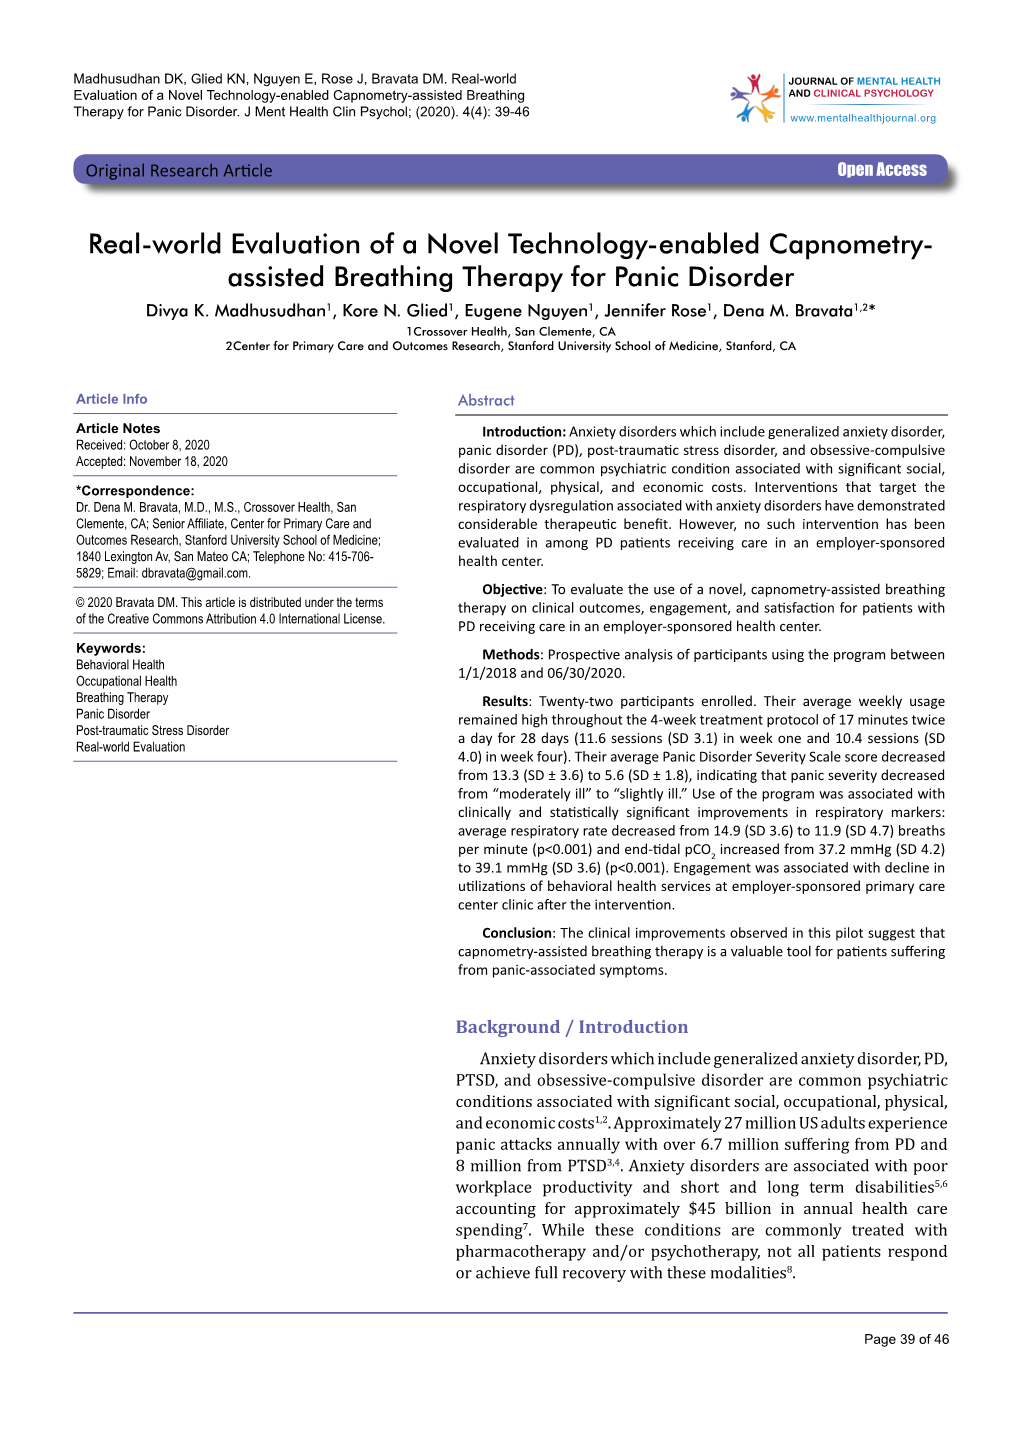 Real-World Evaluation of a Novel Technology-Enabled Capnometry- Assisted Breathing Therapy for Panic Disorder Divya K